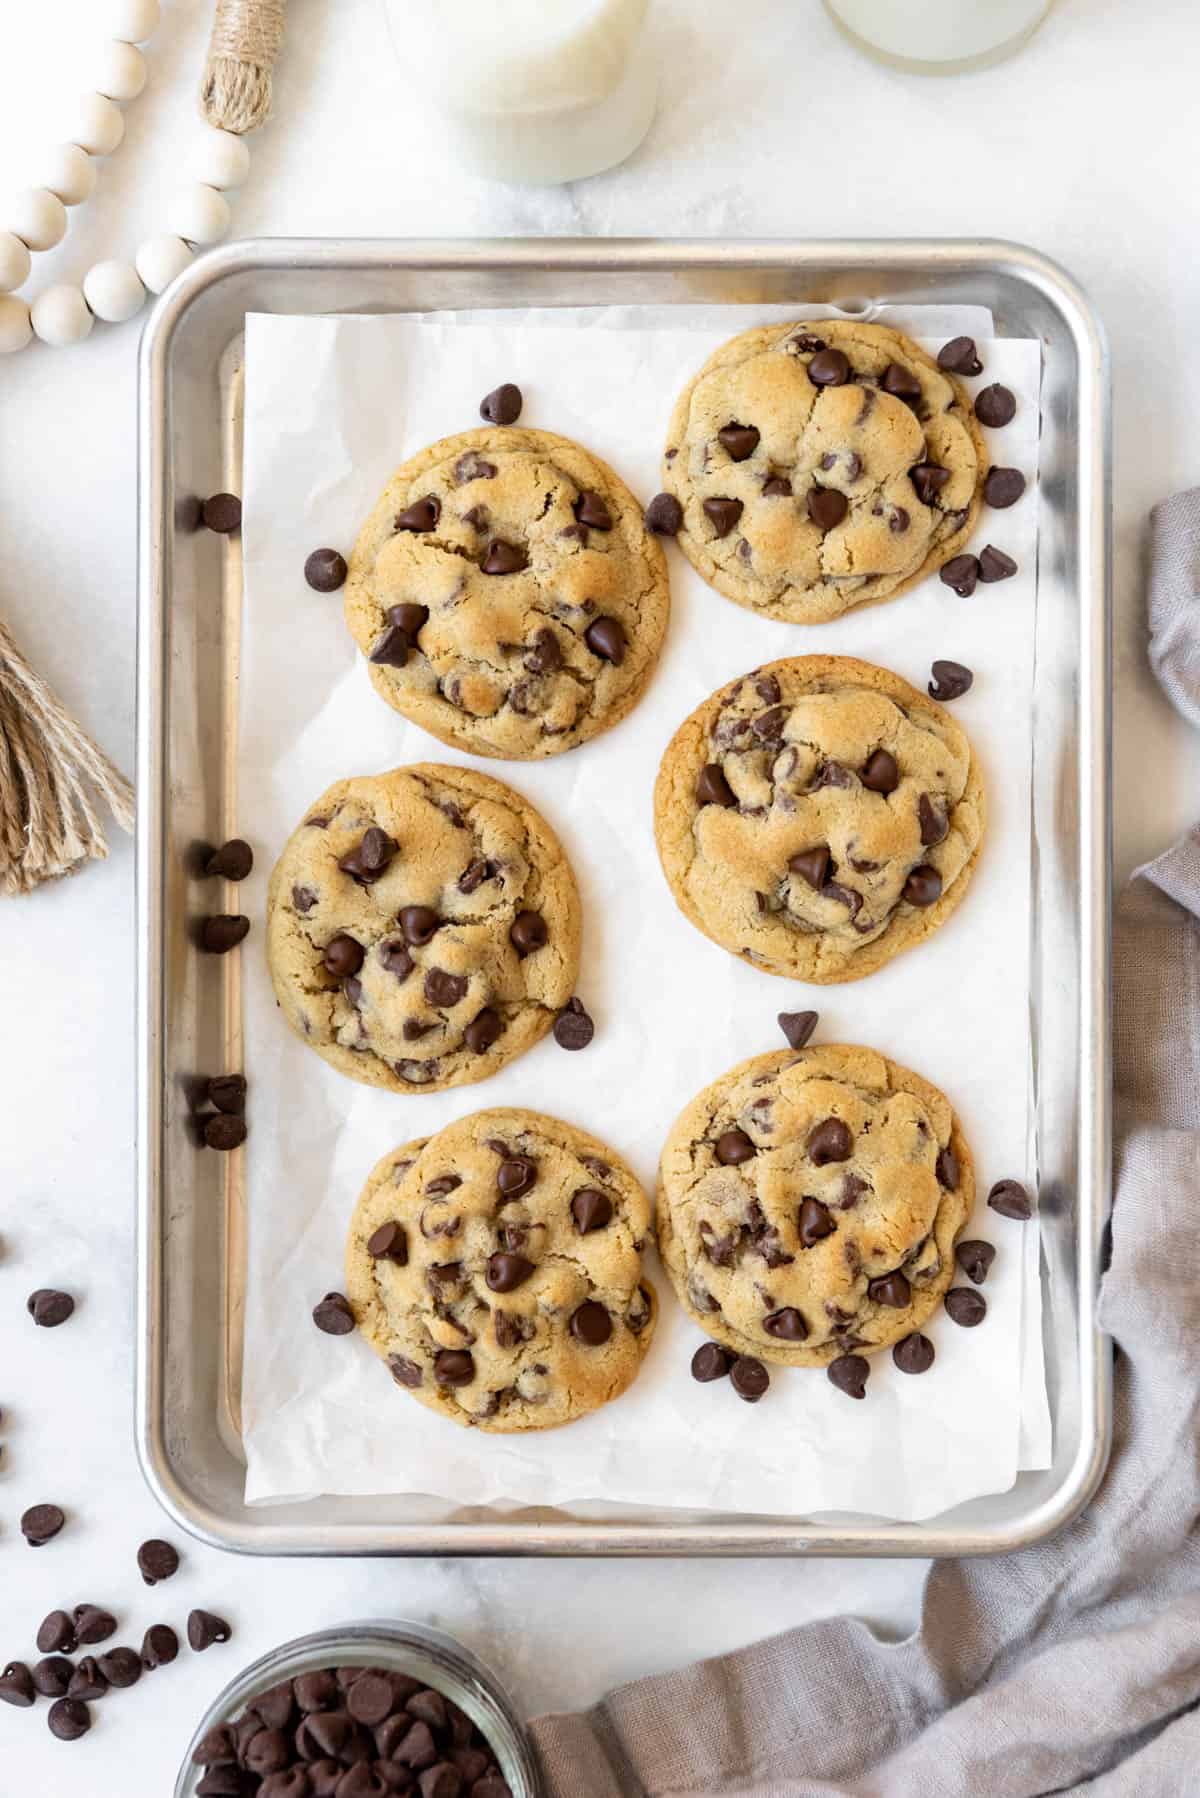 Six small batch chocolate chip cookies on a baking sheet.